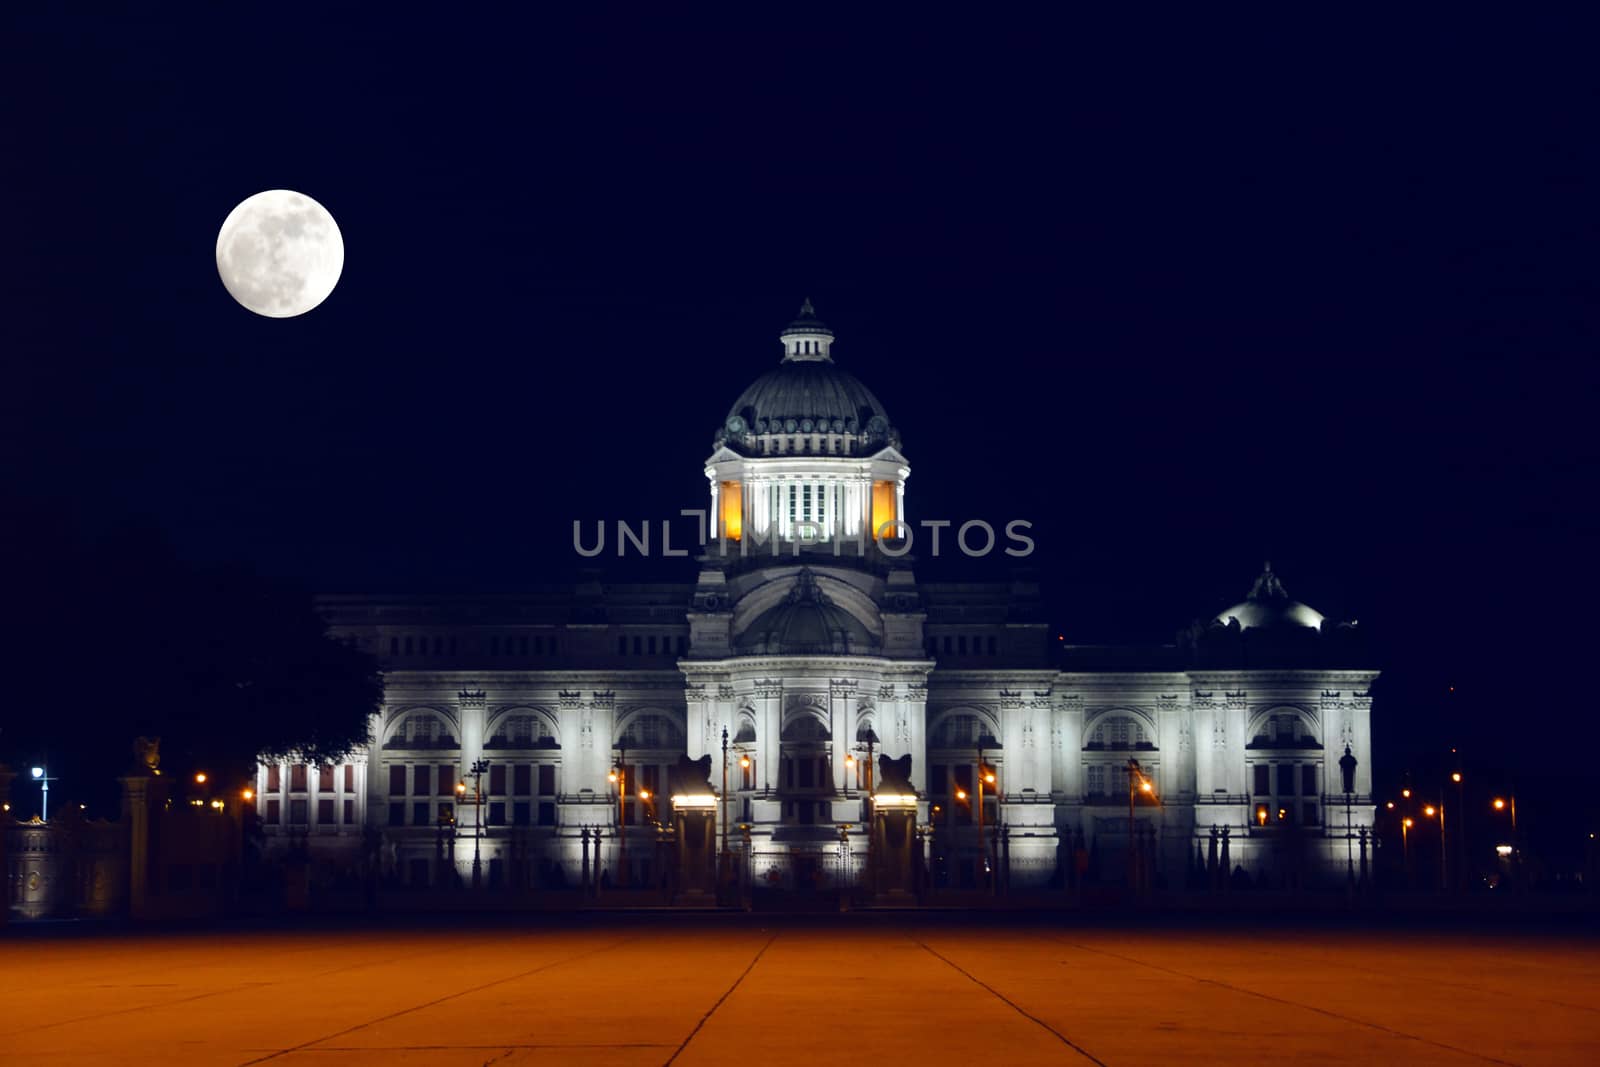 The Throne Hall in Bangkok with super moon / full moon